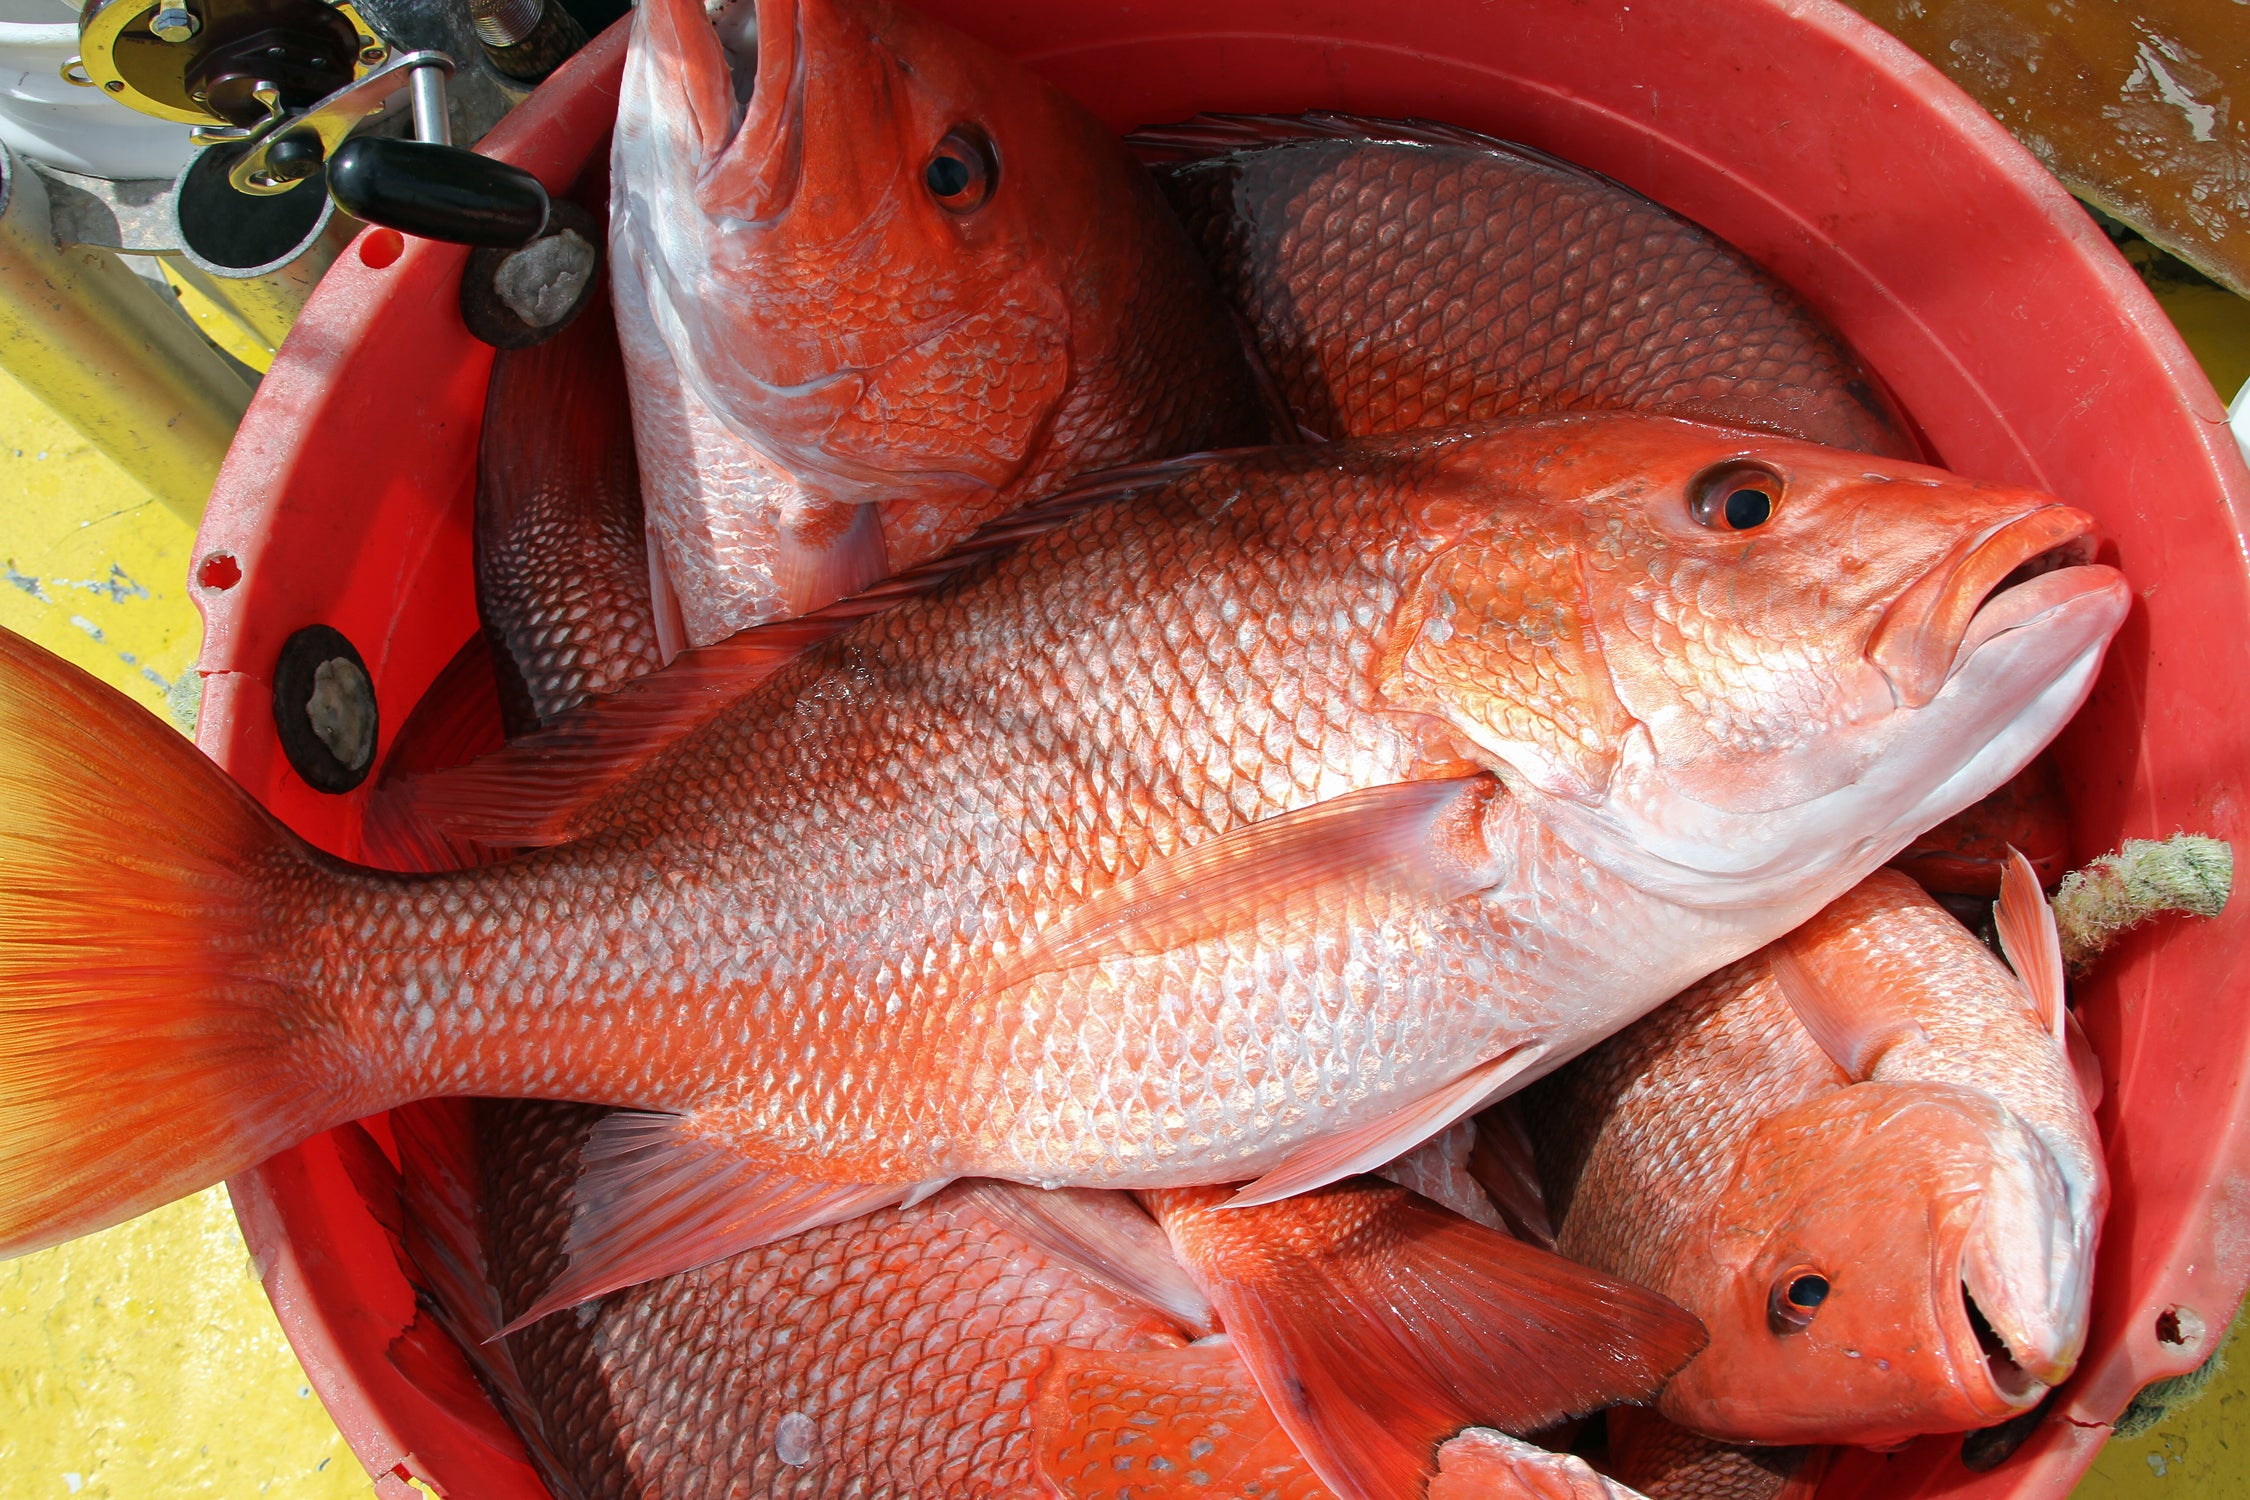 The daily bag limit will be two red snapper per person, per day with a minimum size limit of 16 inches total length.